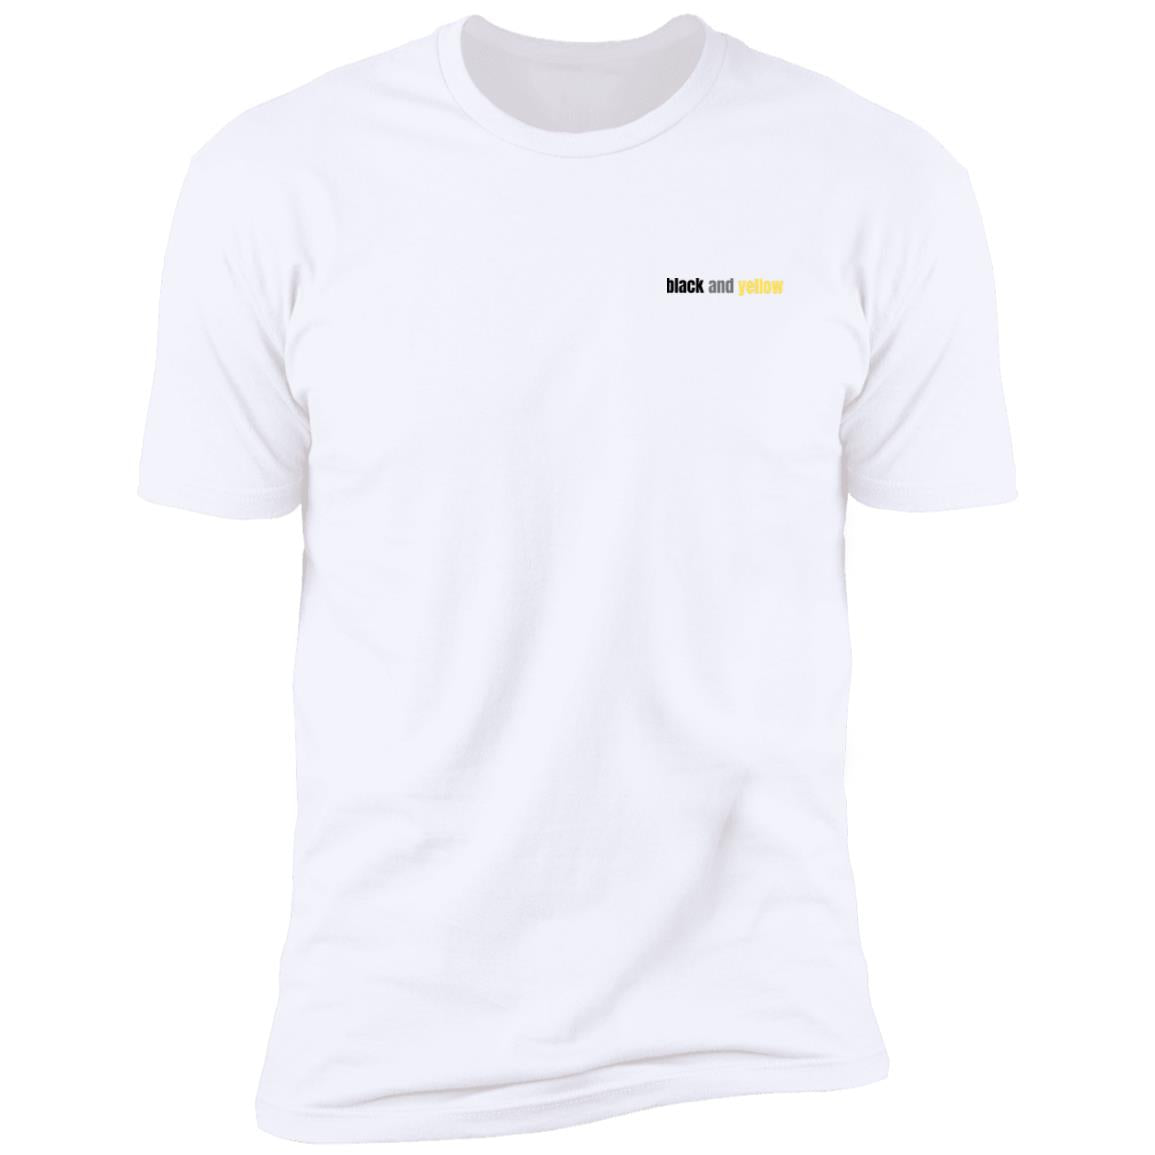 Black And Yellow Rapper Shirt